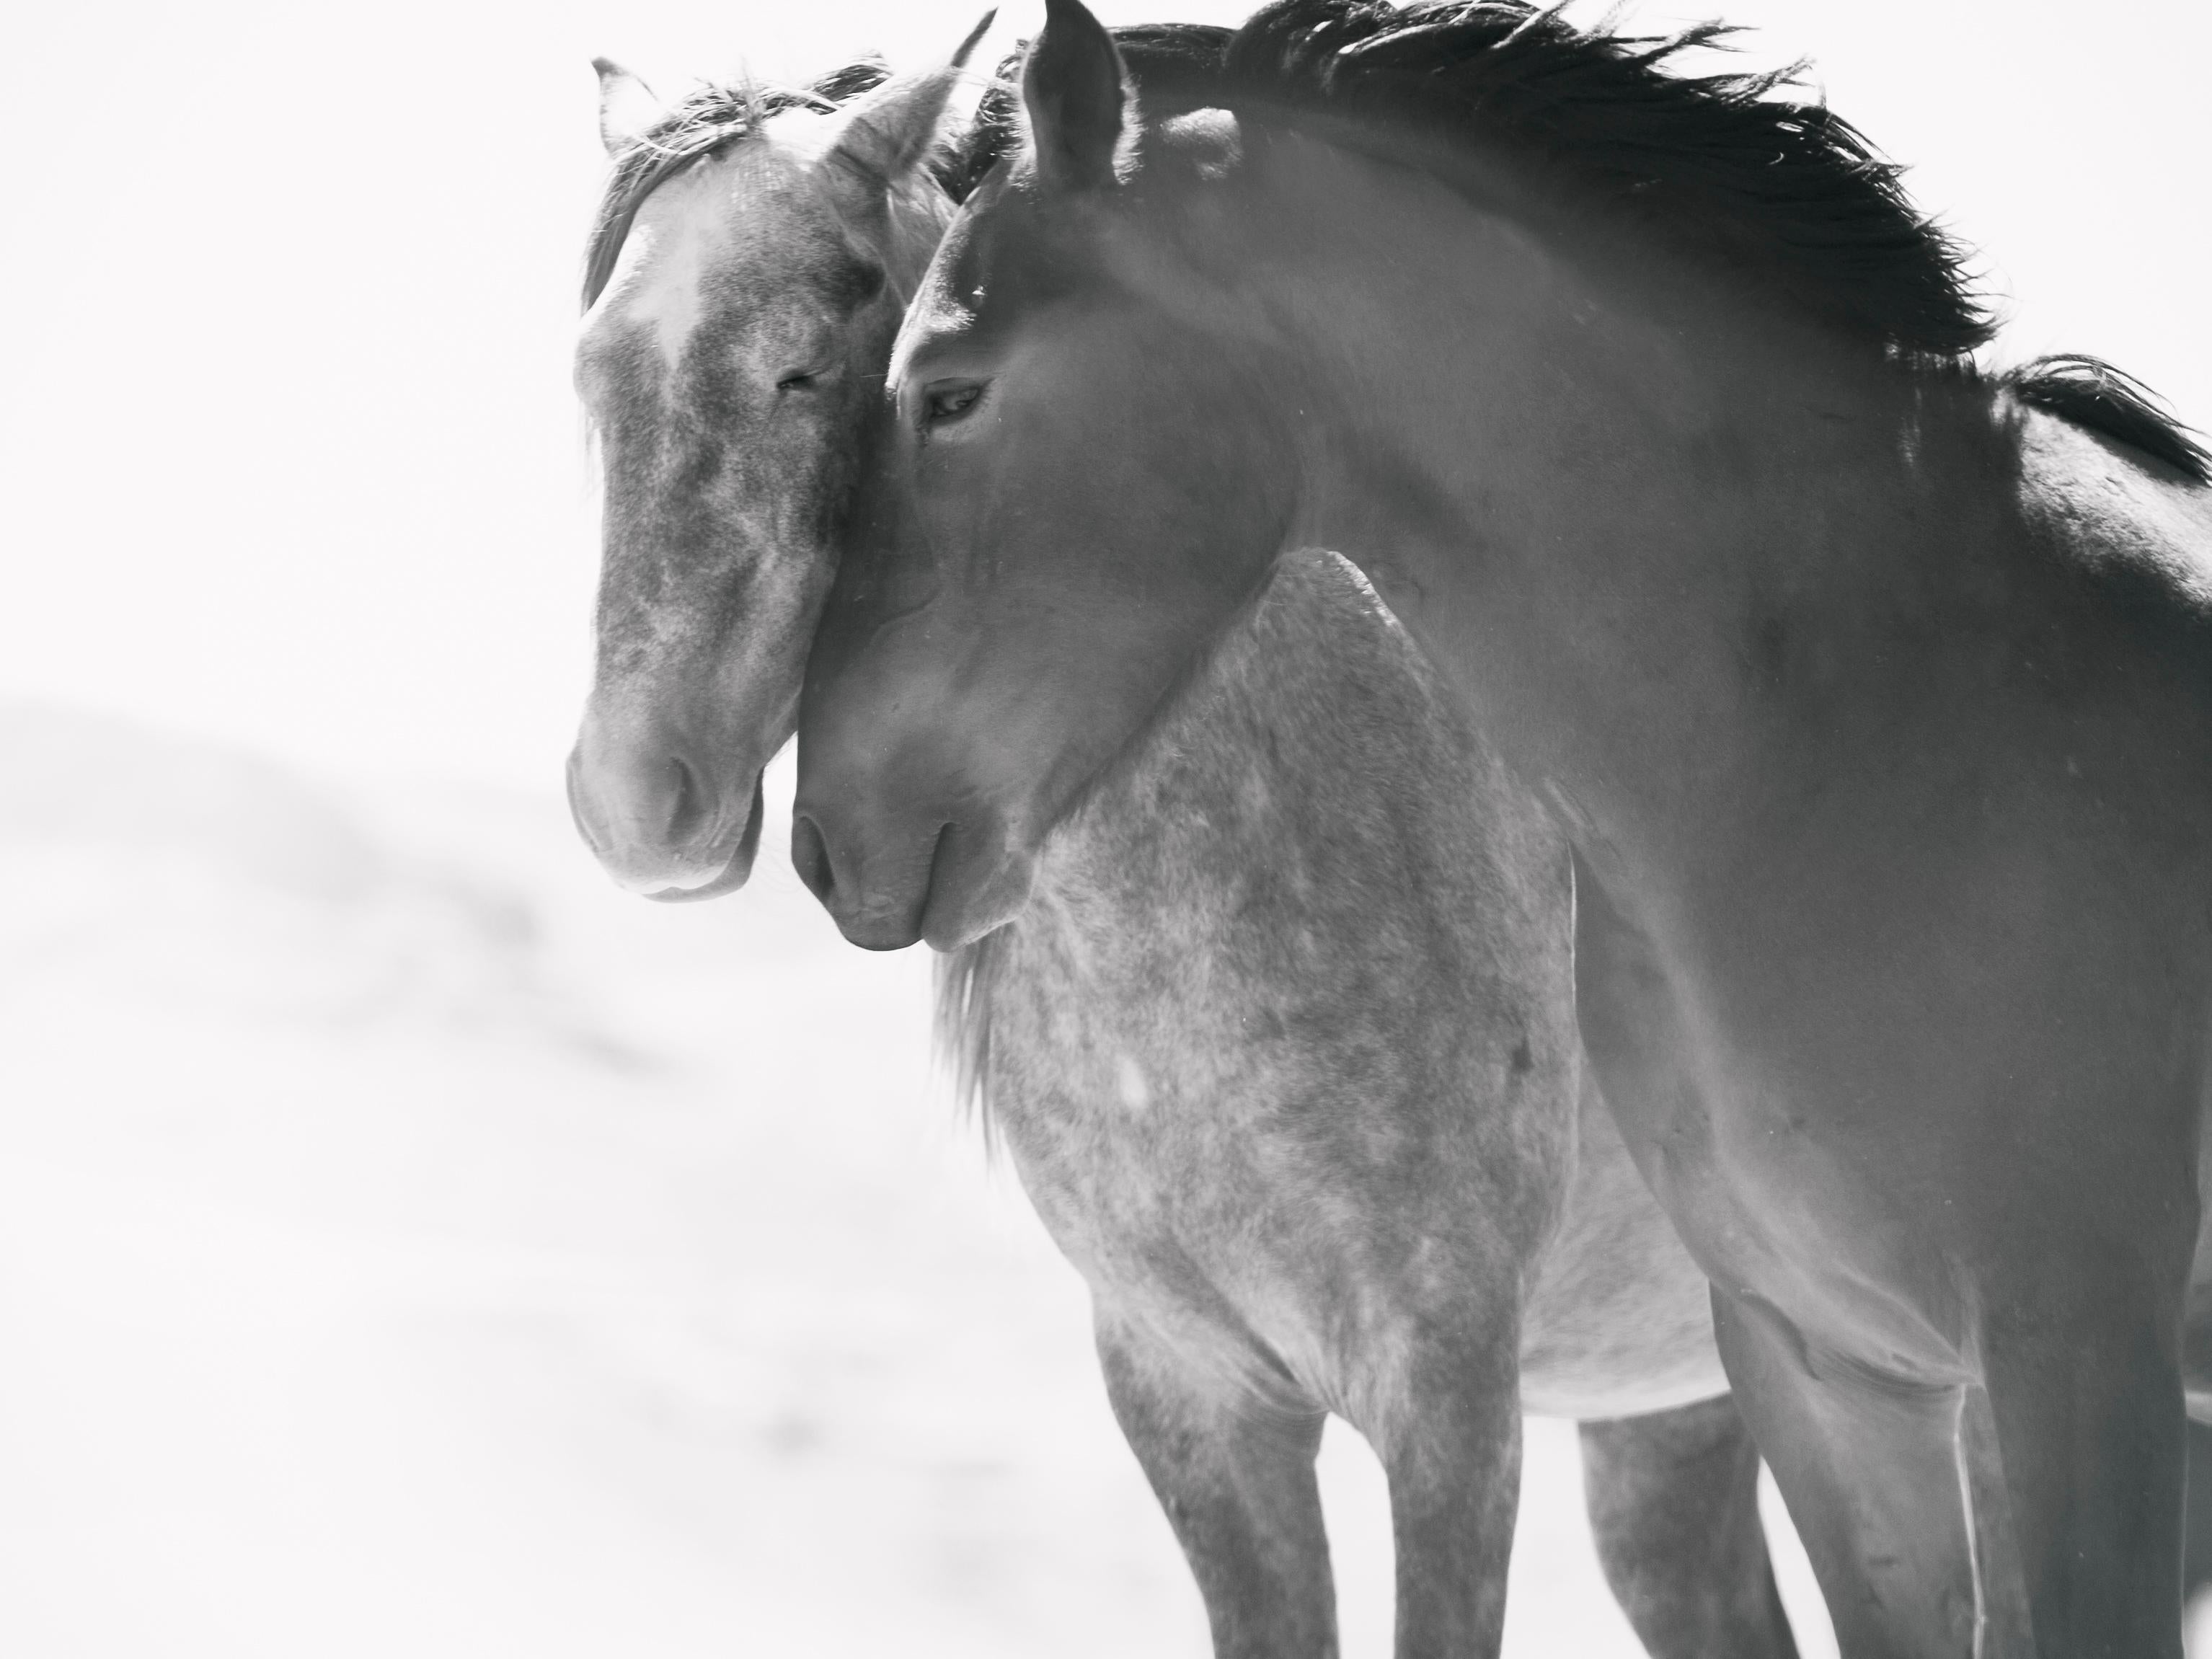 Shane Russeck Animal Print - "Soulmates"  24x36 Black and White Photography Wild Horses Mustangs Photograph 